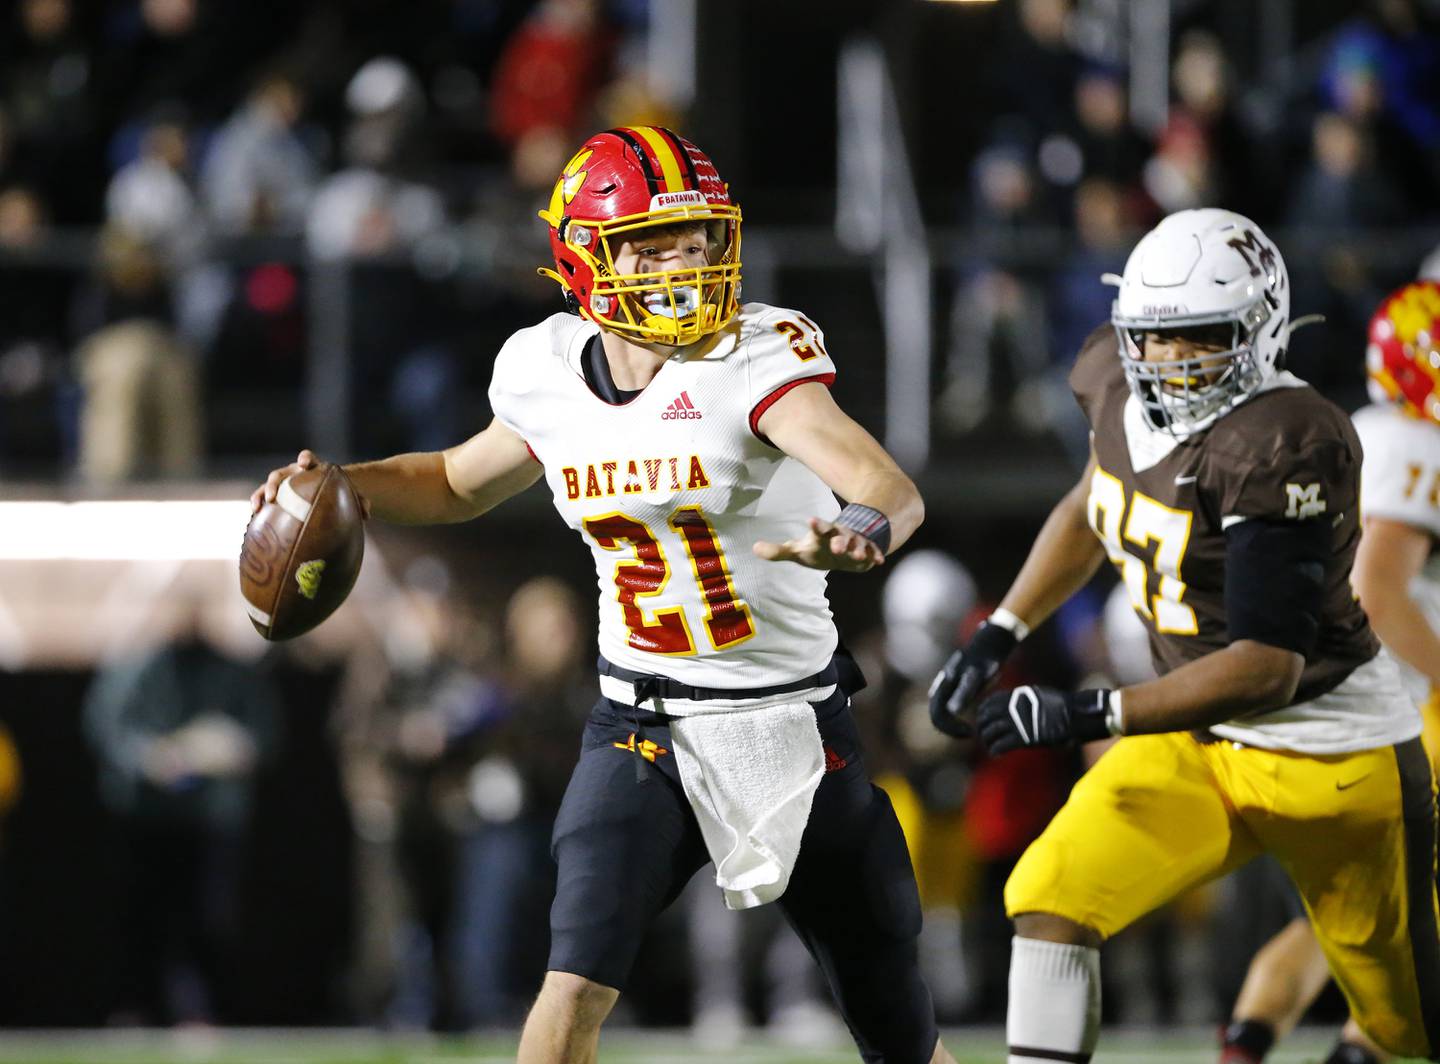 Batavia's Ryan Boe looks for a receiver during the IHSA Class 7A  varsity football playoff game between Batavia and Mt. Carmel on Friday, November 5, 2021 in Chicago.